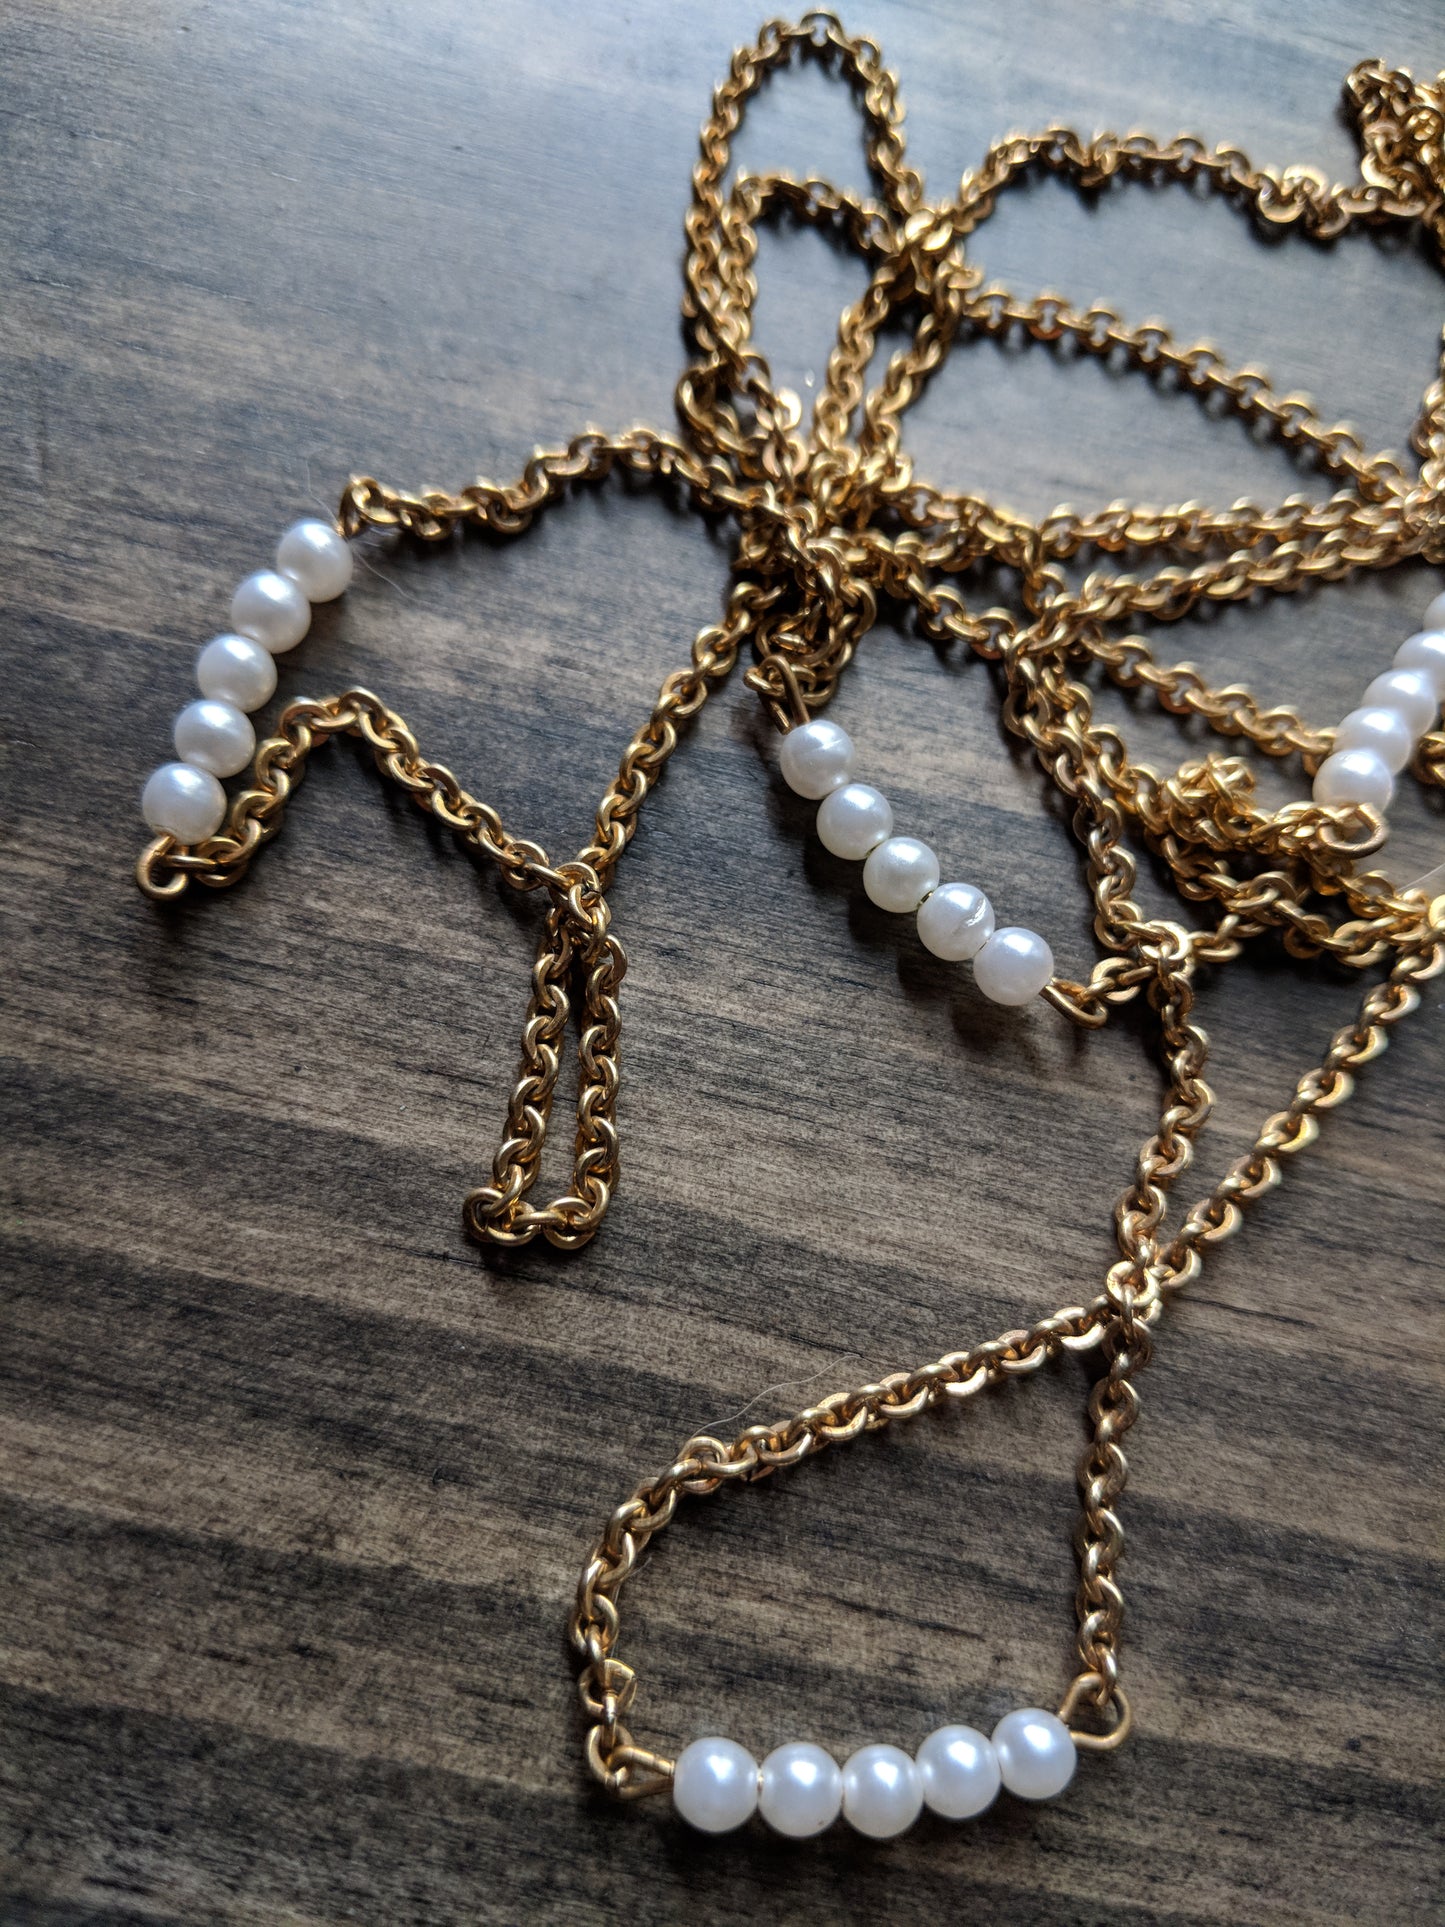 Vintage Gold Tone 40" Necklace w/ Faux Pearl Bar Stations